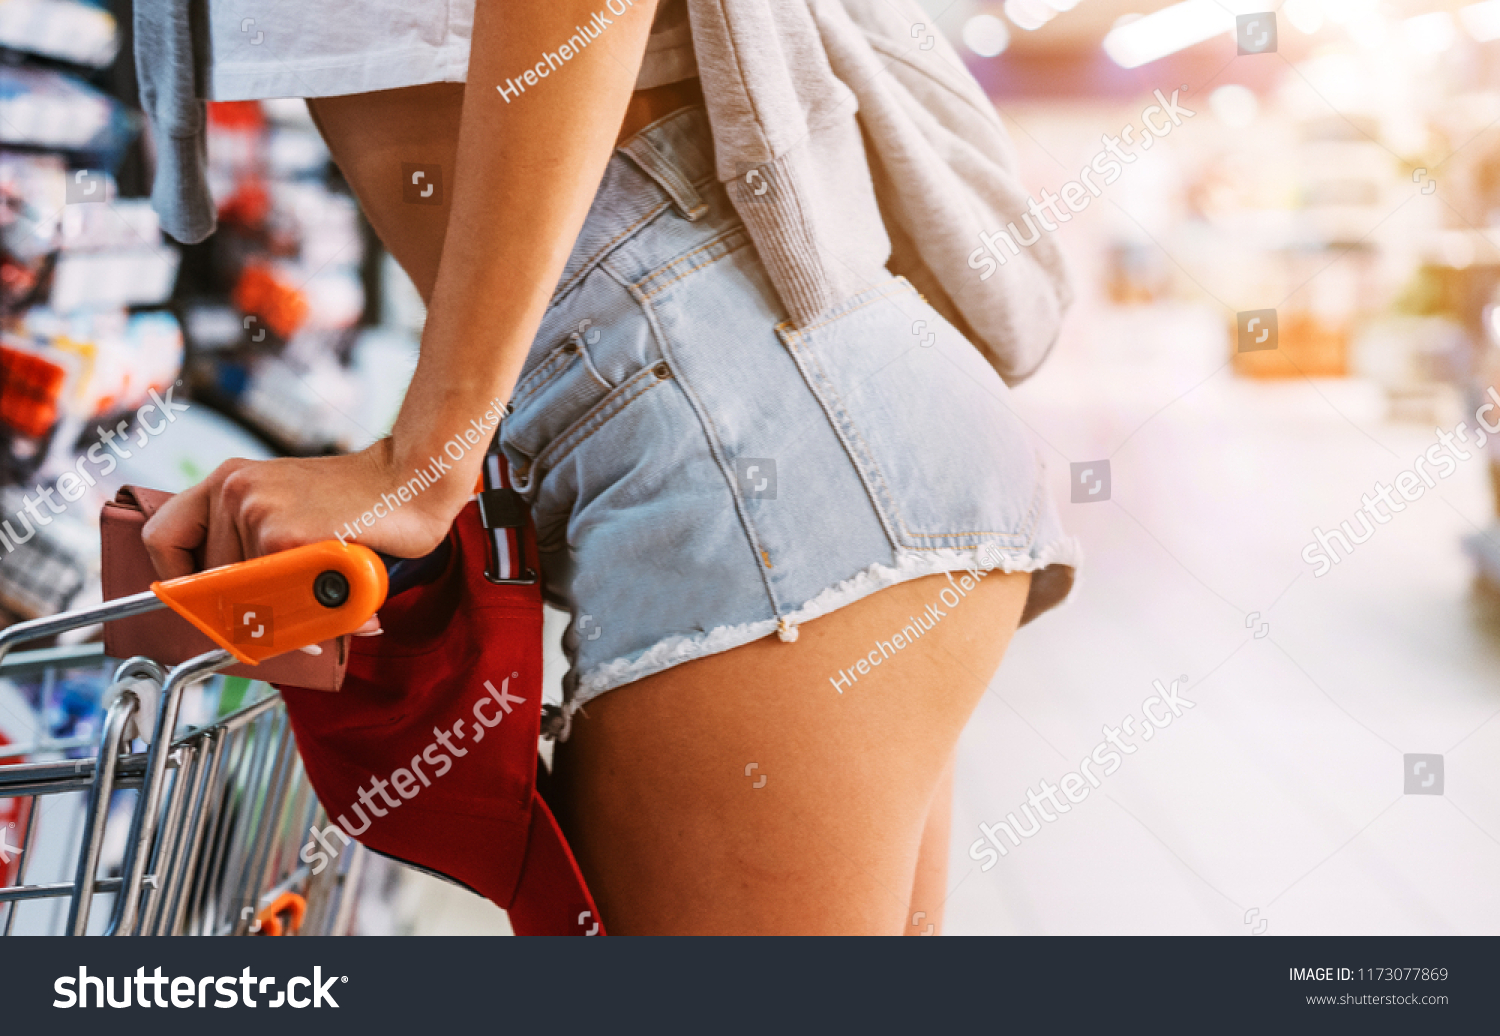 Hot girls at the store images Hot Girl Legs Grocery Store Stock Photo Edit Now 1173077869